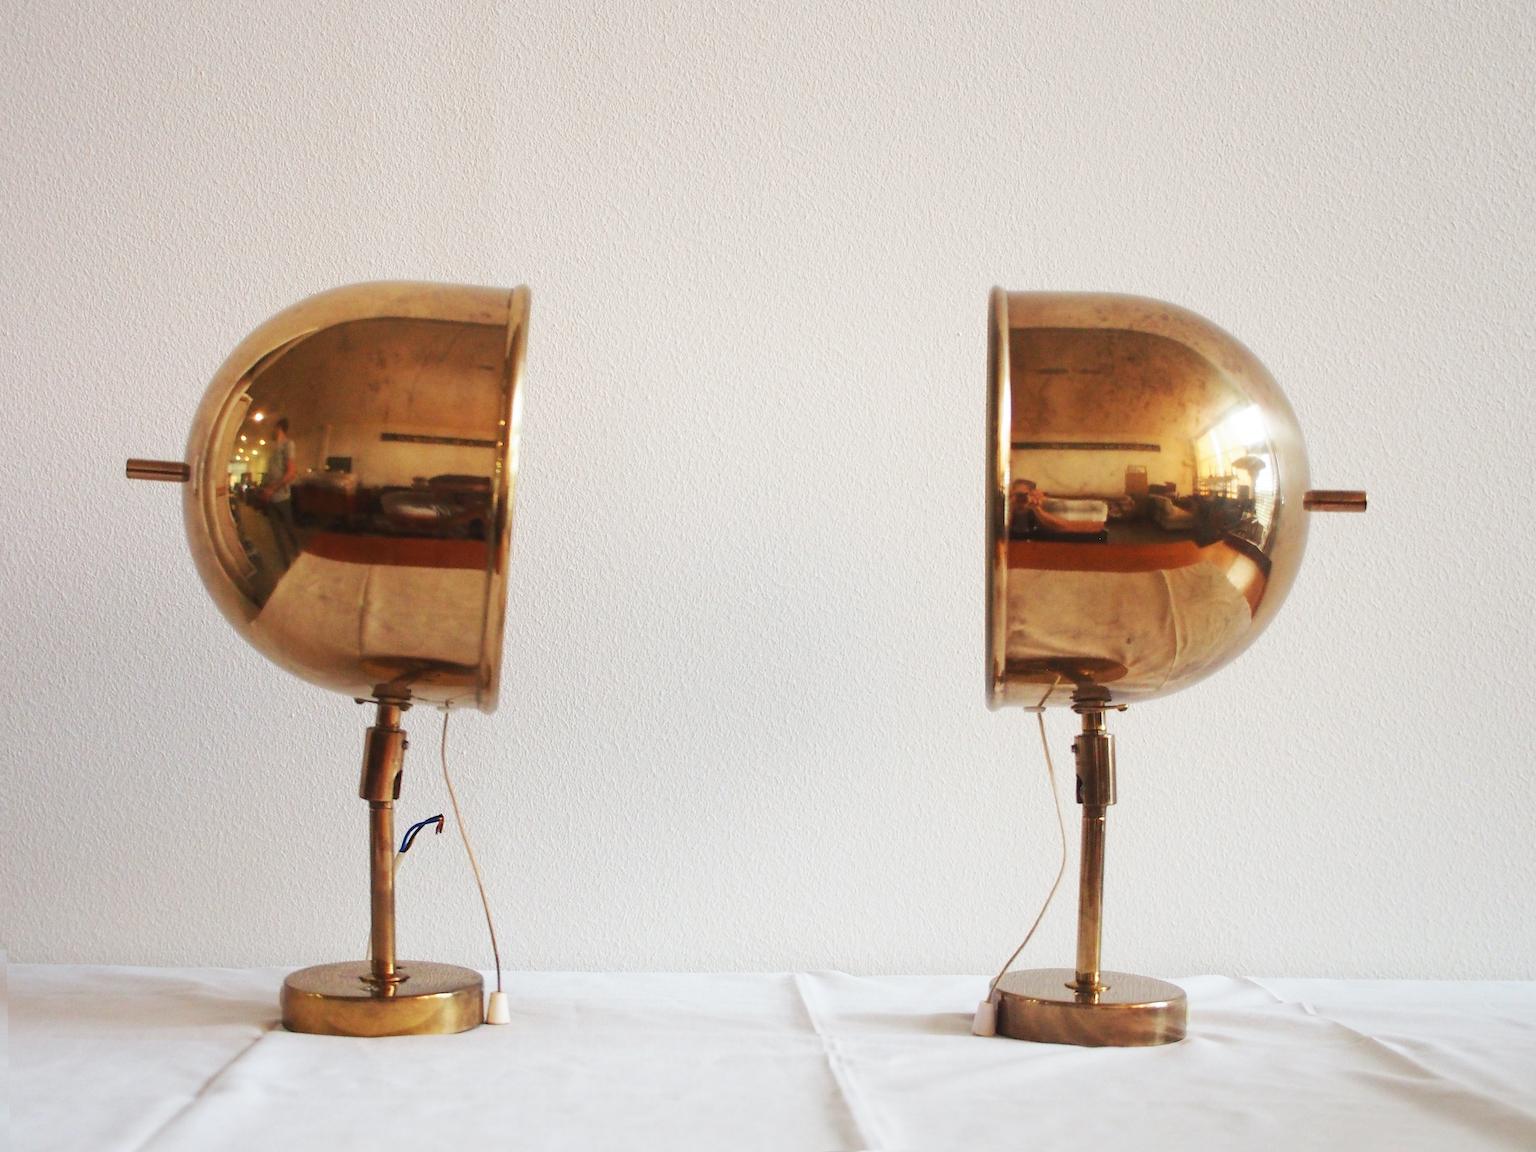 Pair of brass adjustable wall lamps made by Bergboms in Sweden, circa 1970. Brass exterior with slight patina, interior painted white. Cord to pull to switch the lamps on and off.